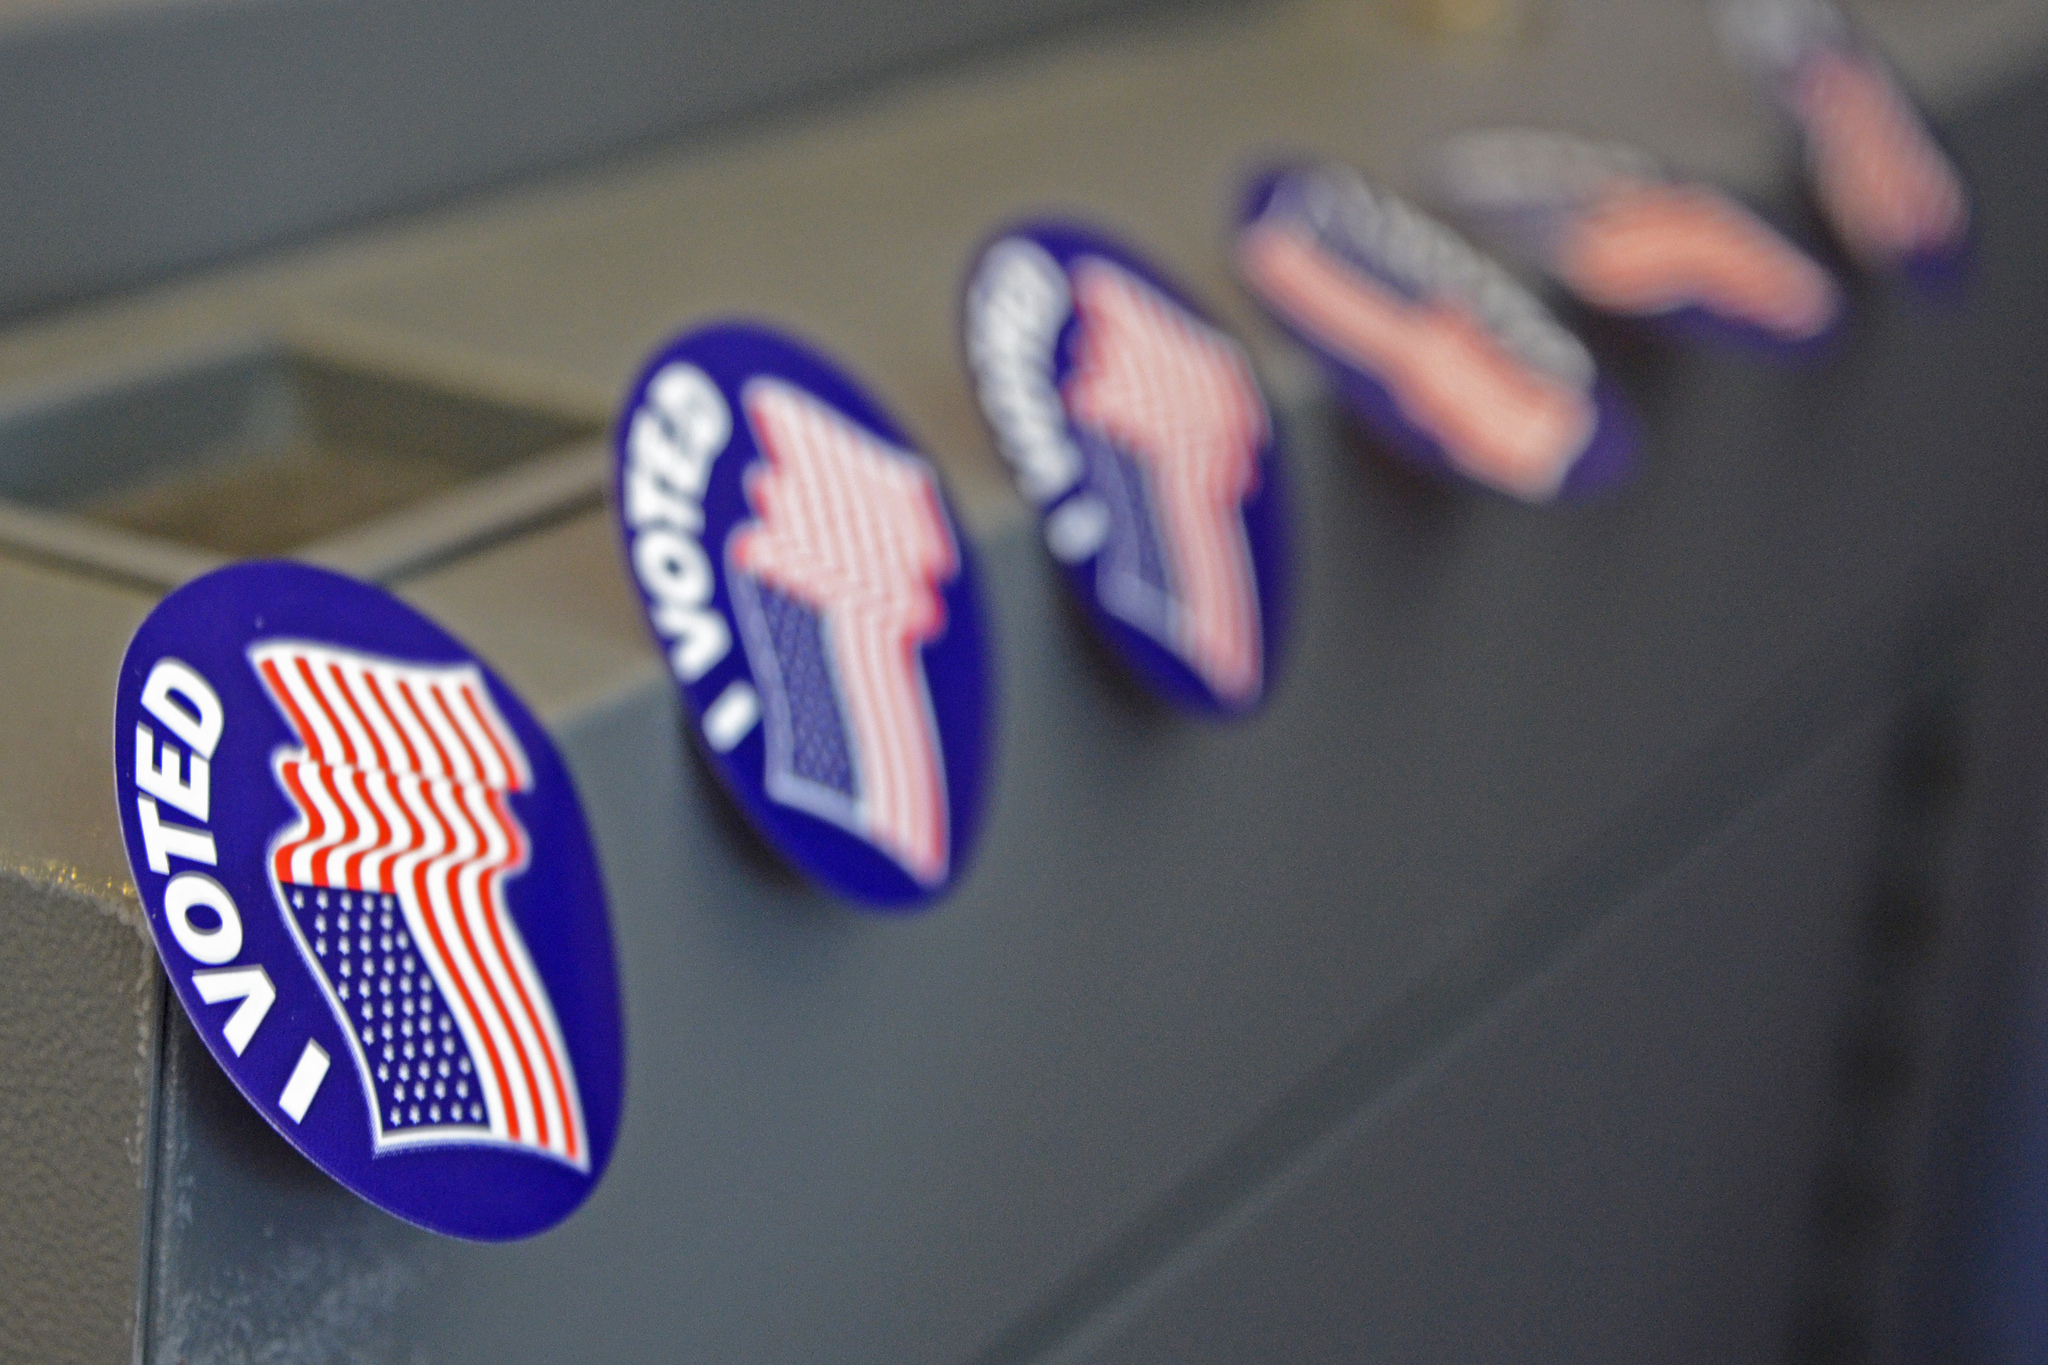    “I Voted” stickers are placed on the polling machine for voters to take after ballots are entered on April 7, 2015 in Columbia, Mo.